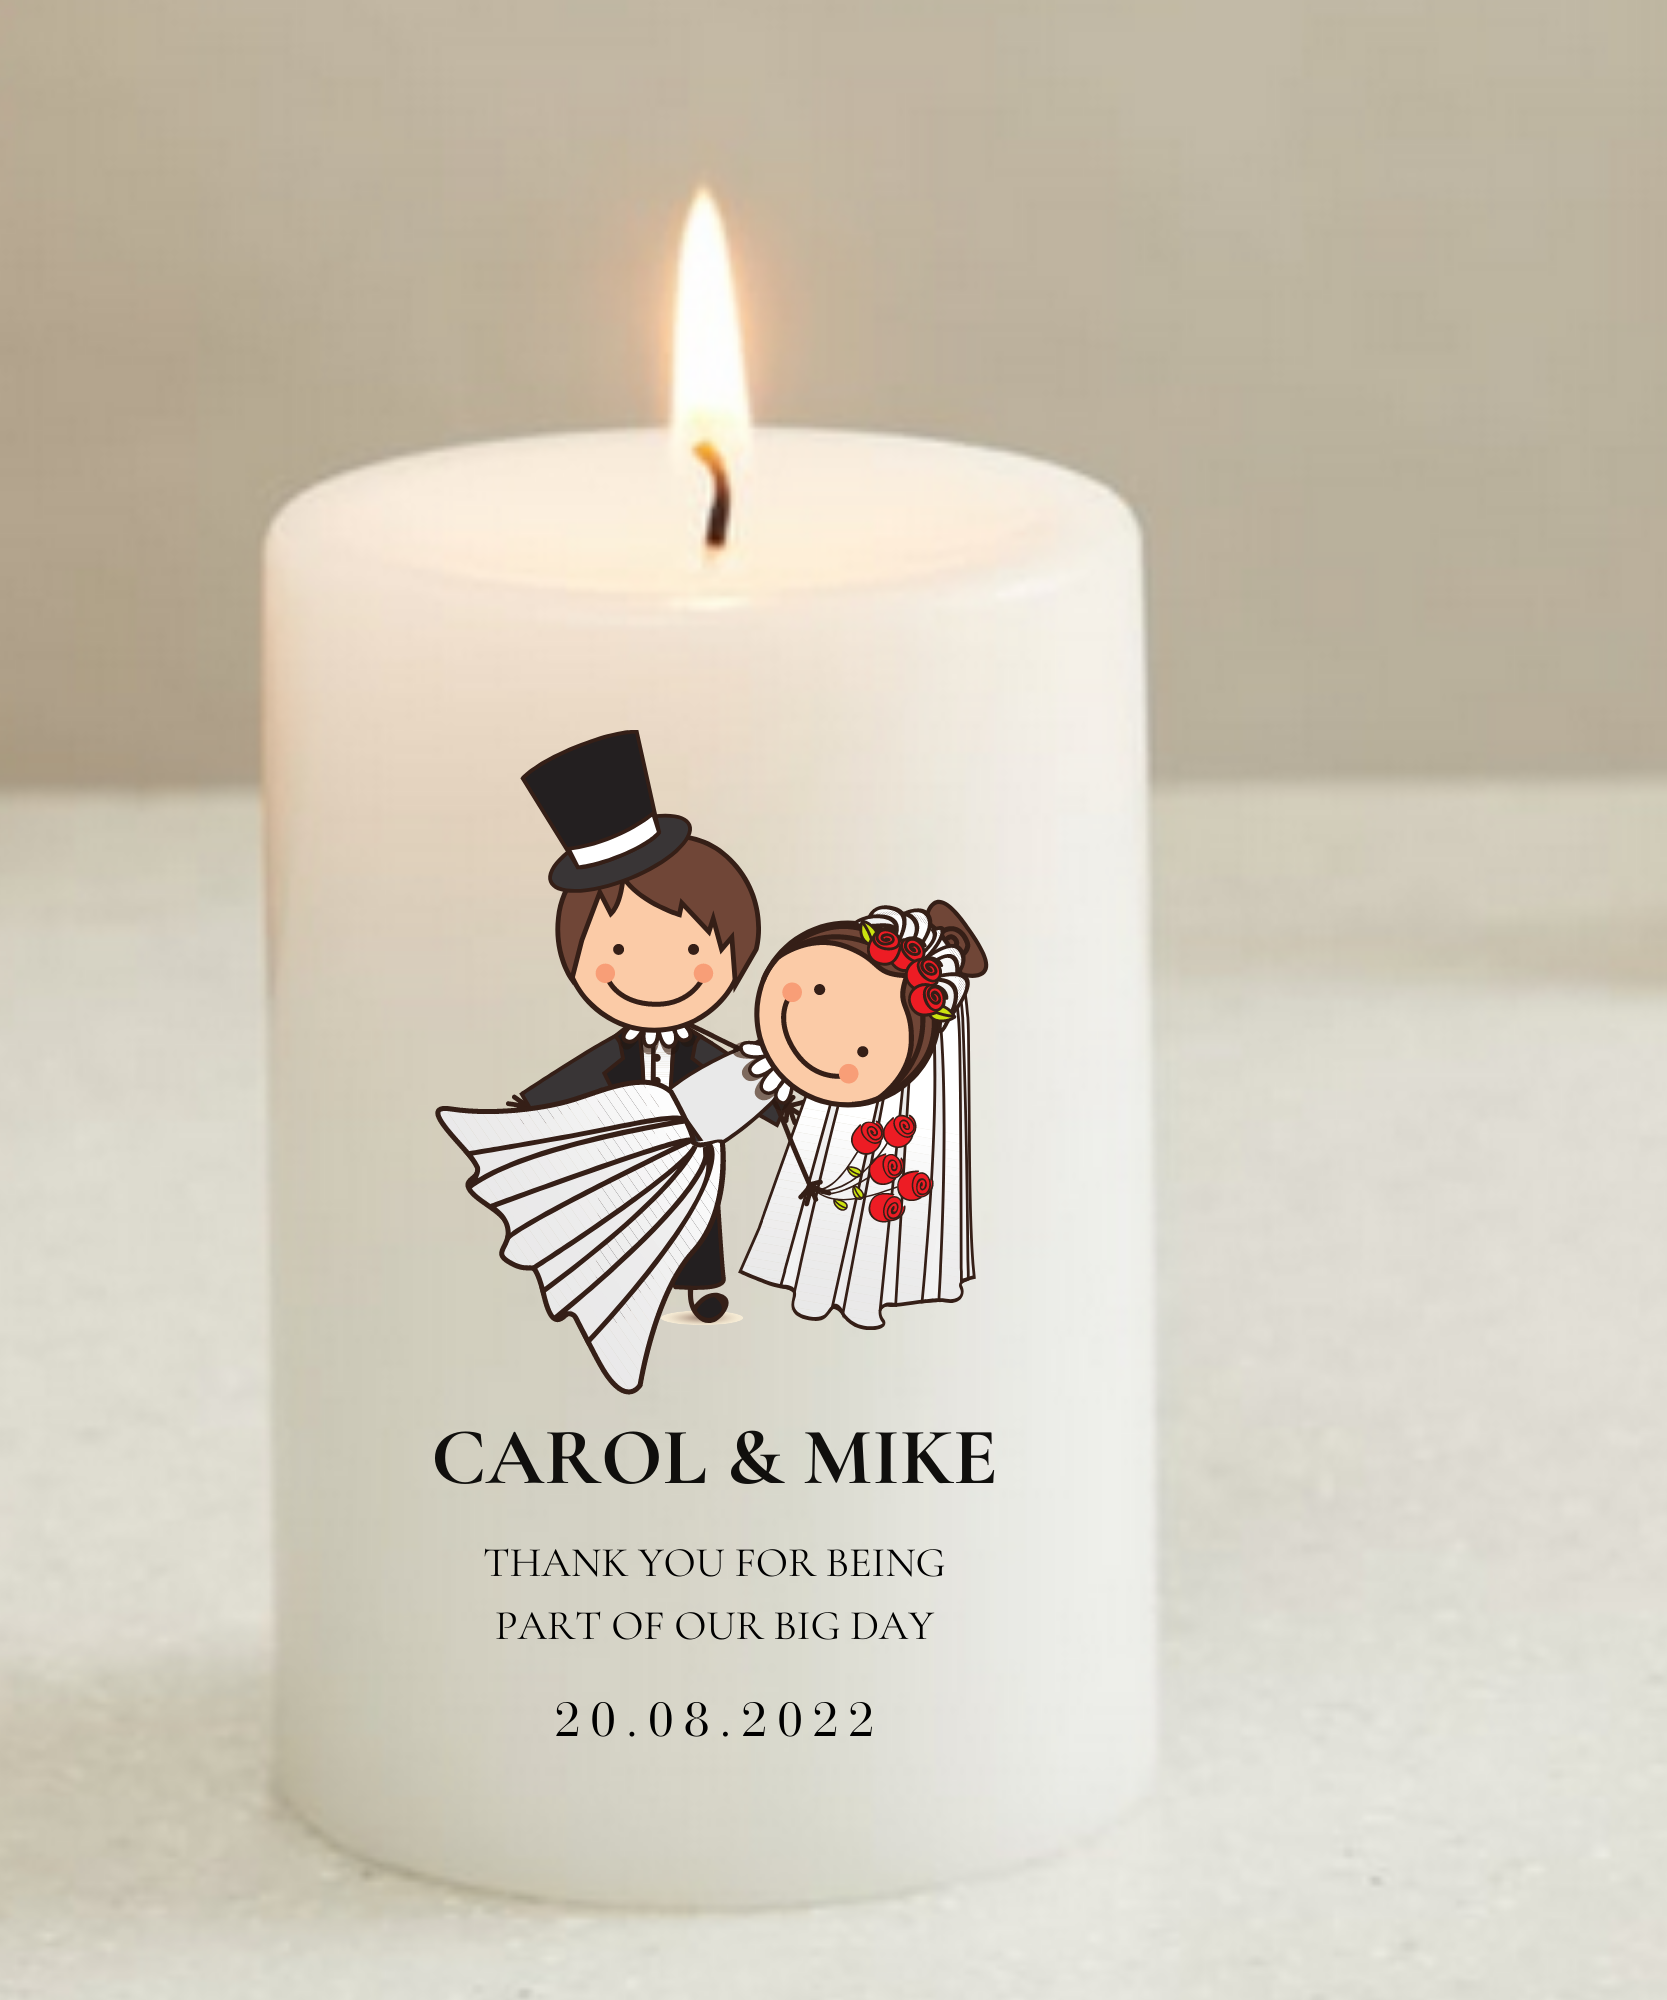 Best Marriage Return Gift Ideas | Candle Return Gifts